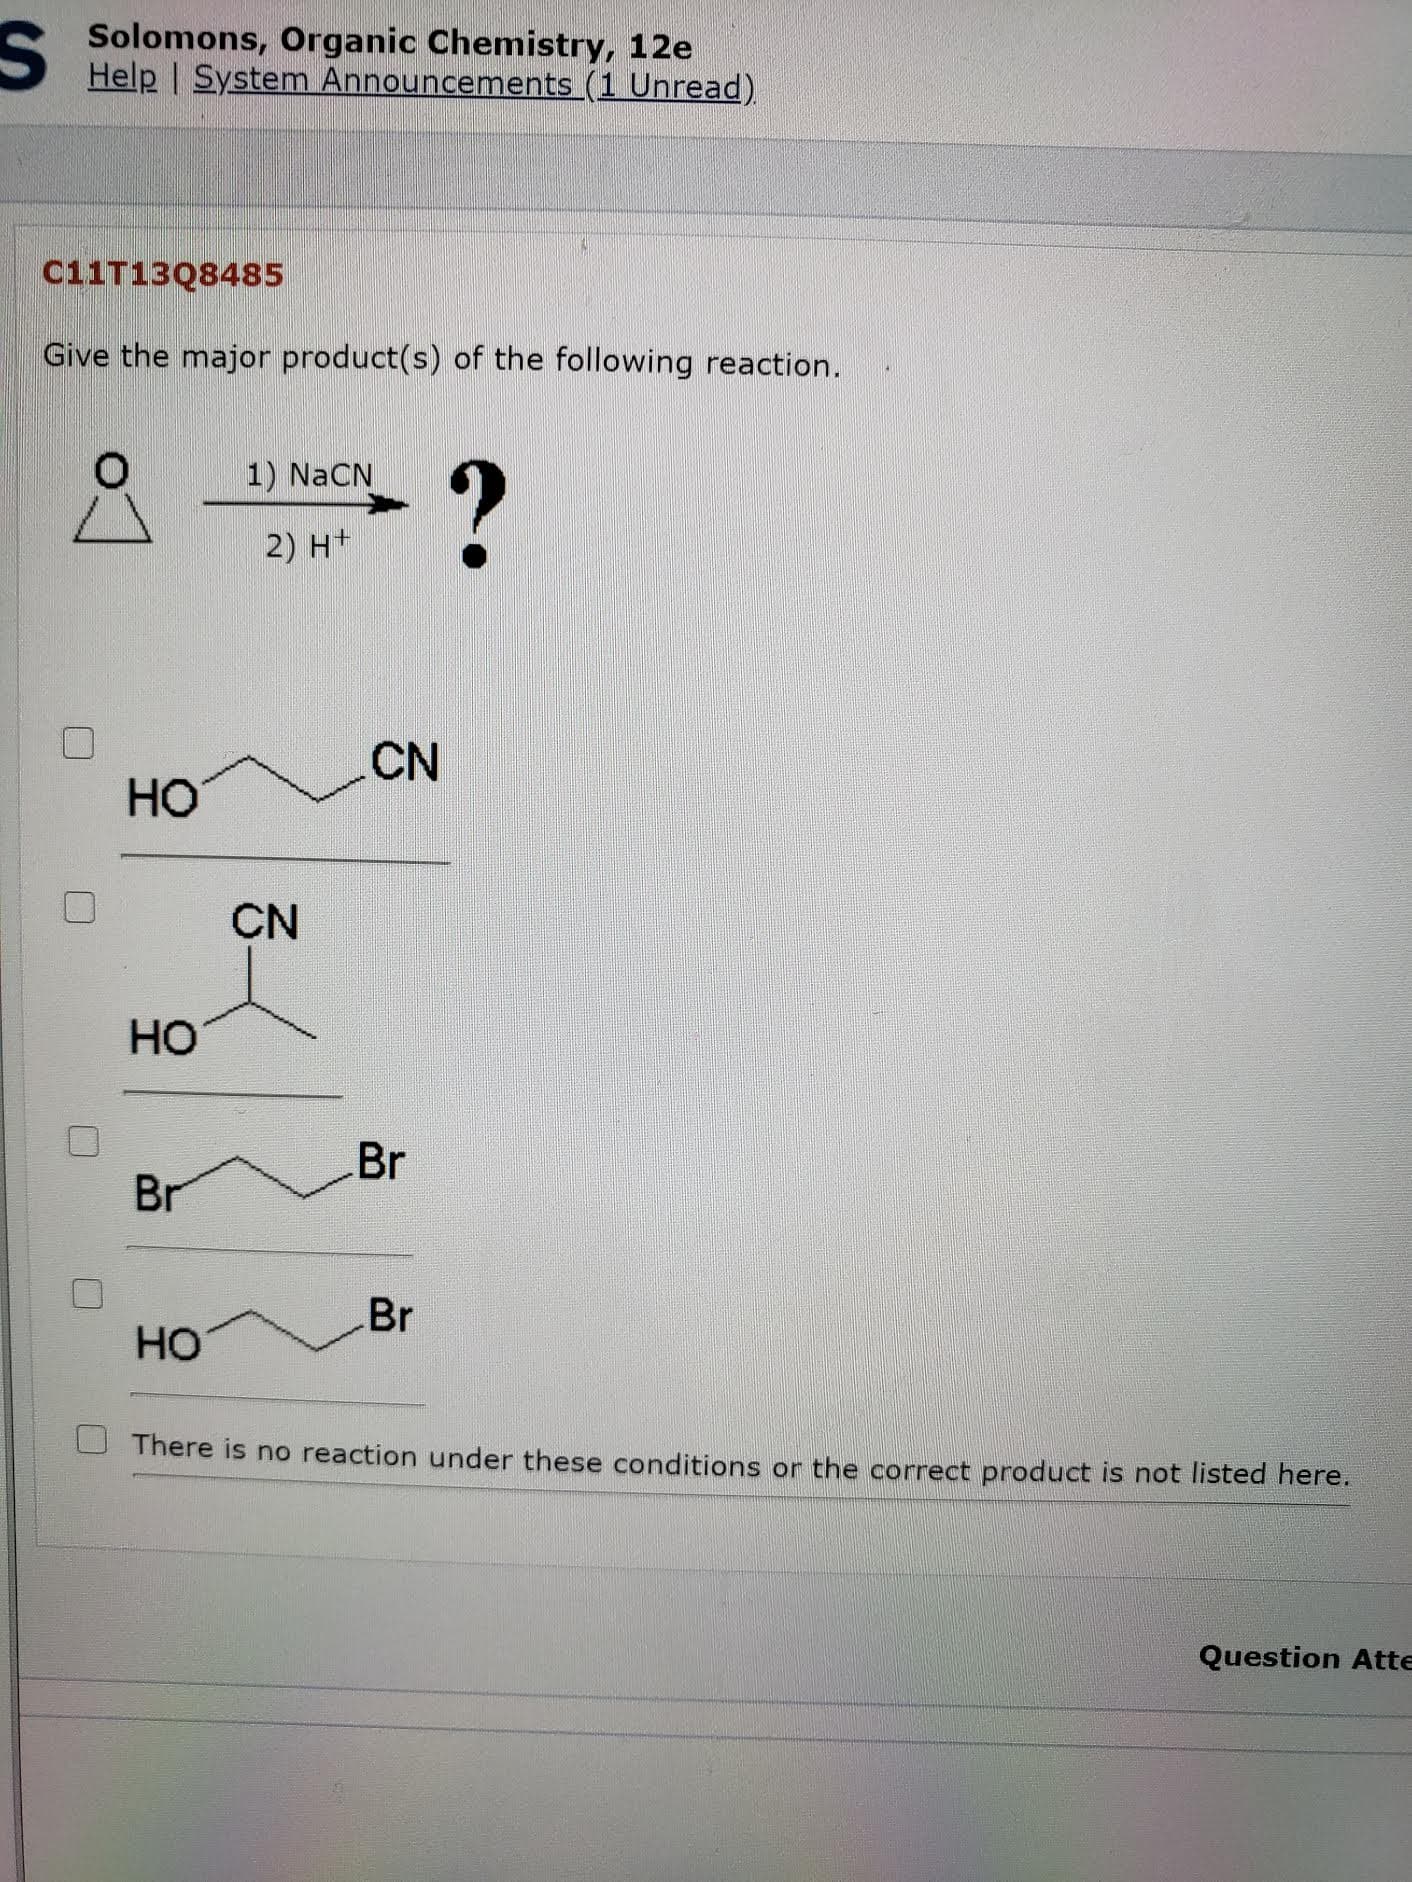 Give the major product(s) of the following reaction.
1) NaCN
2) H+
